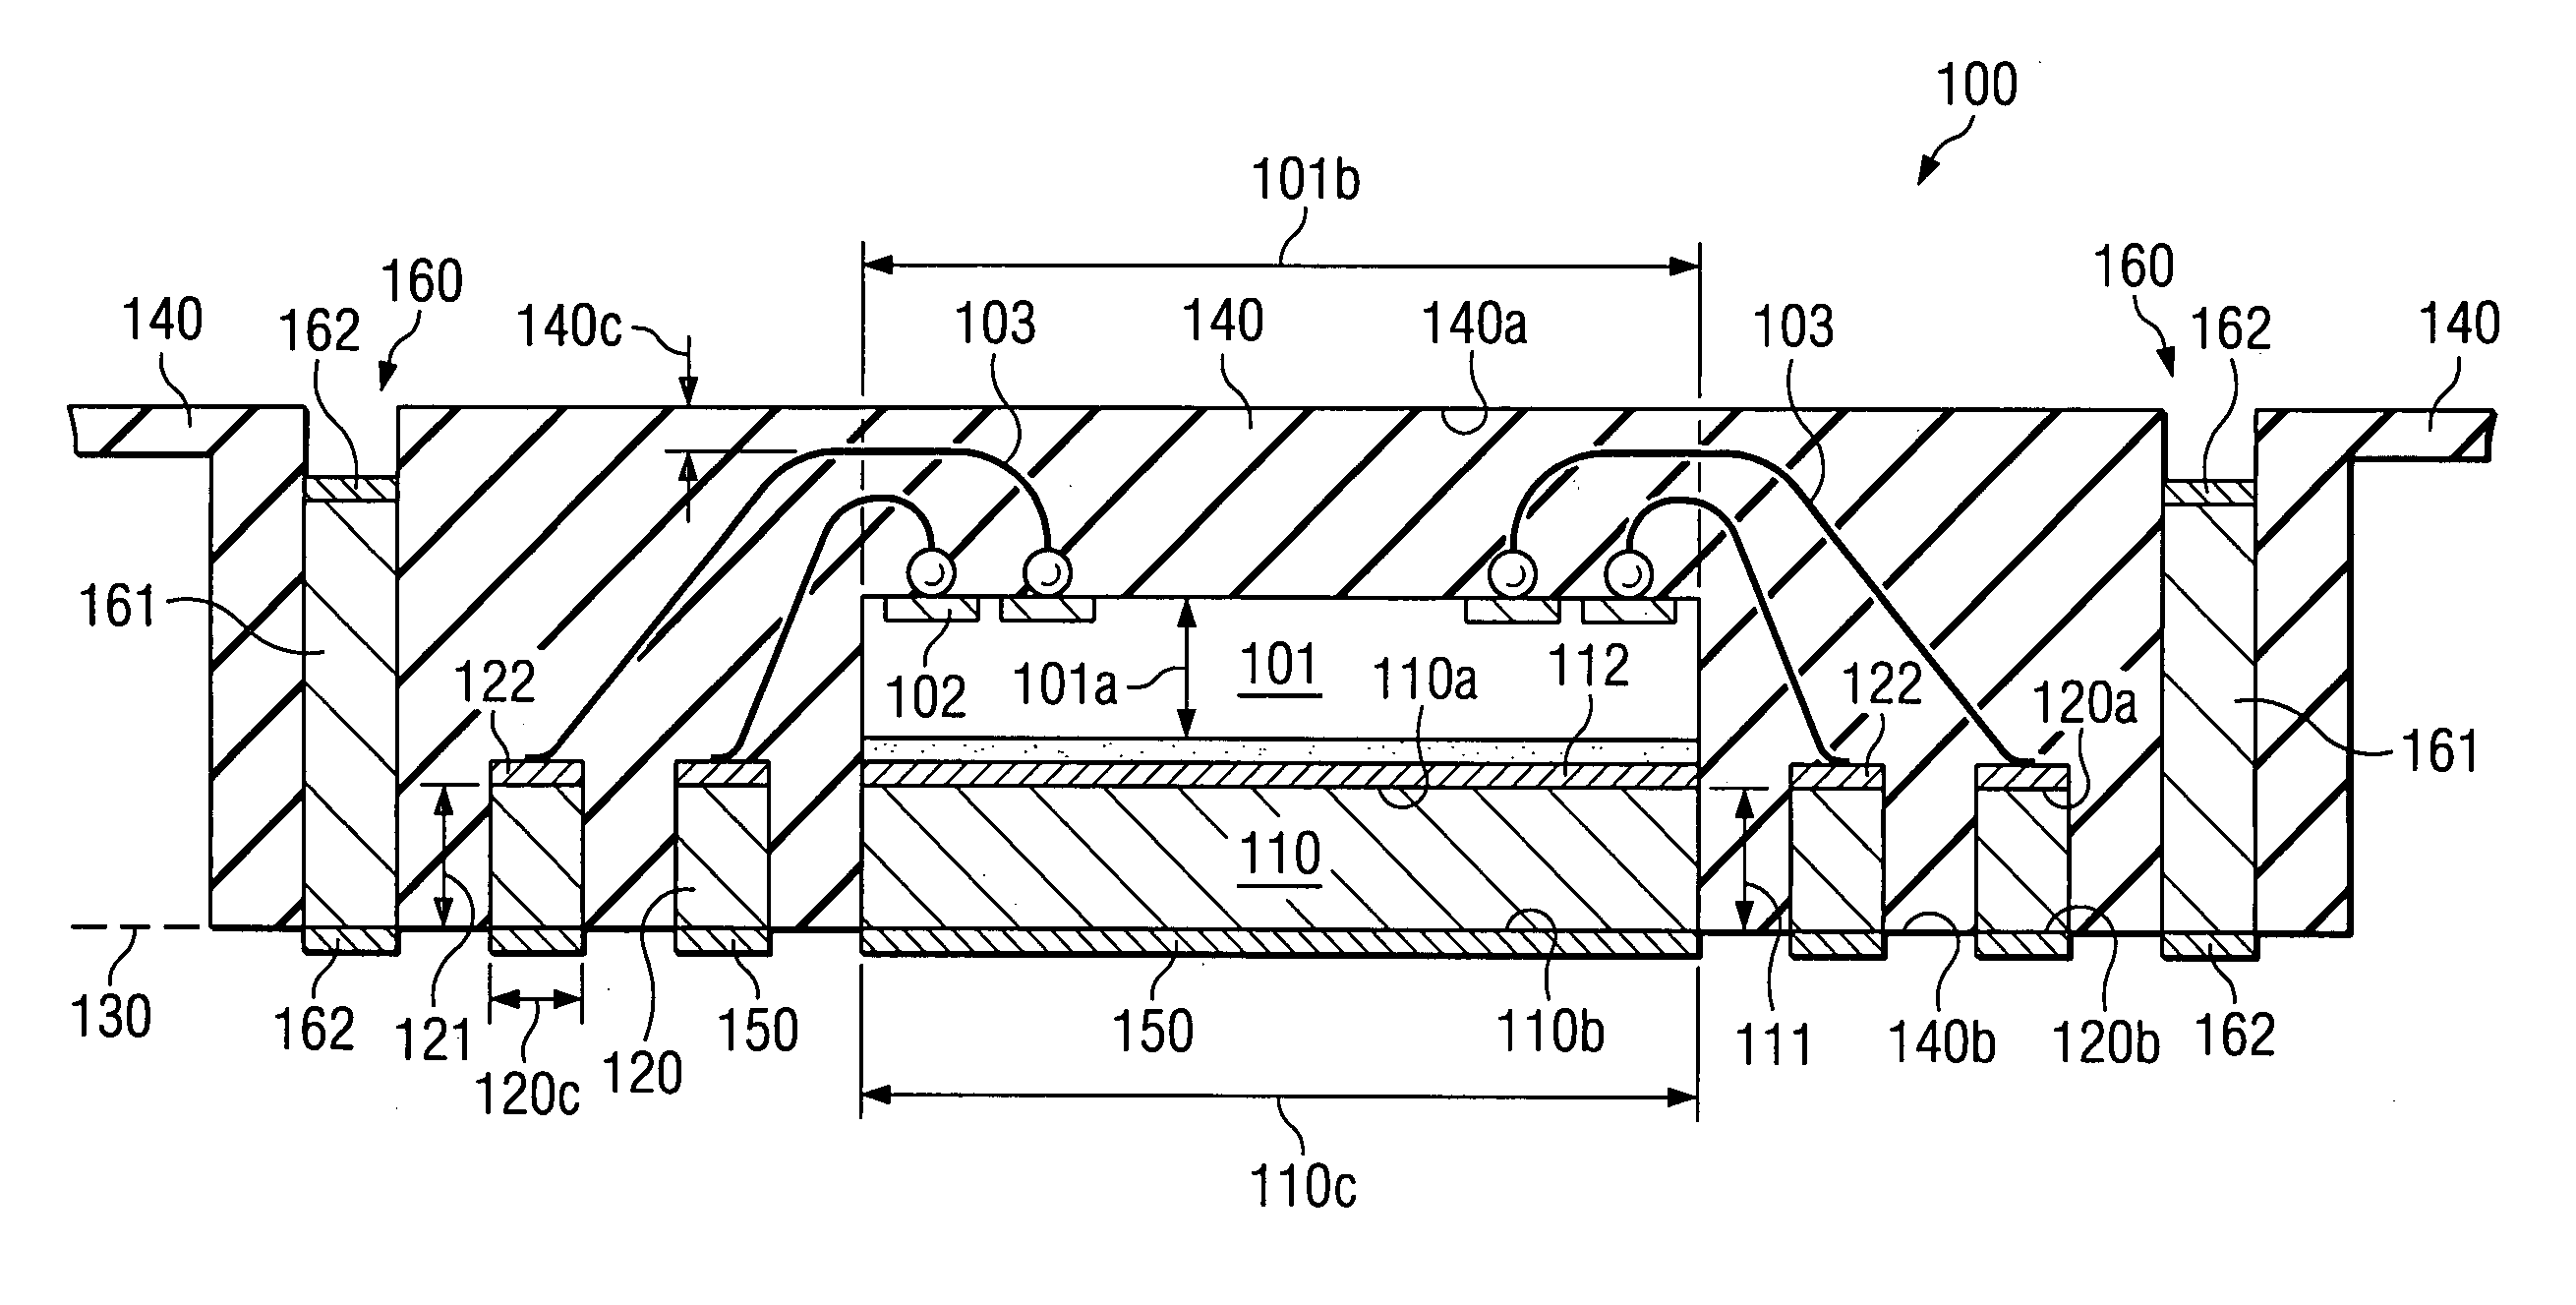 Structure and method of molded QFN device suitable for miniaturization, multiple rows and stacking